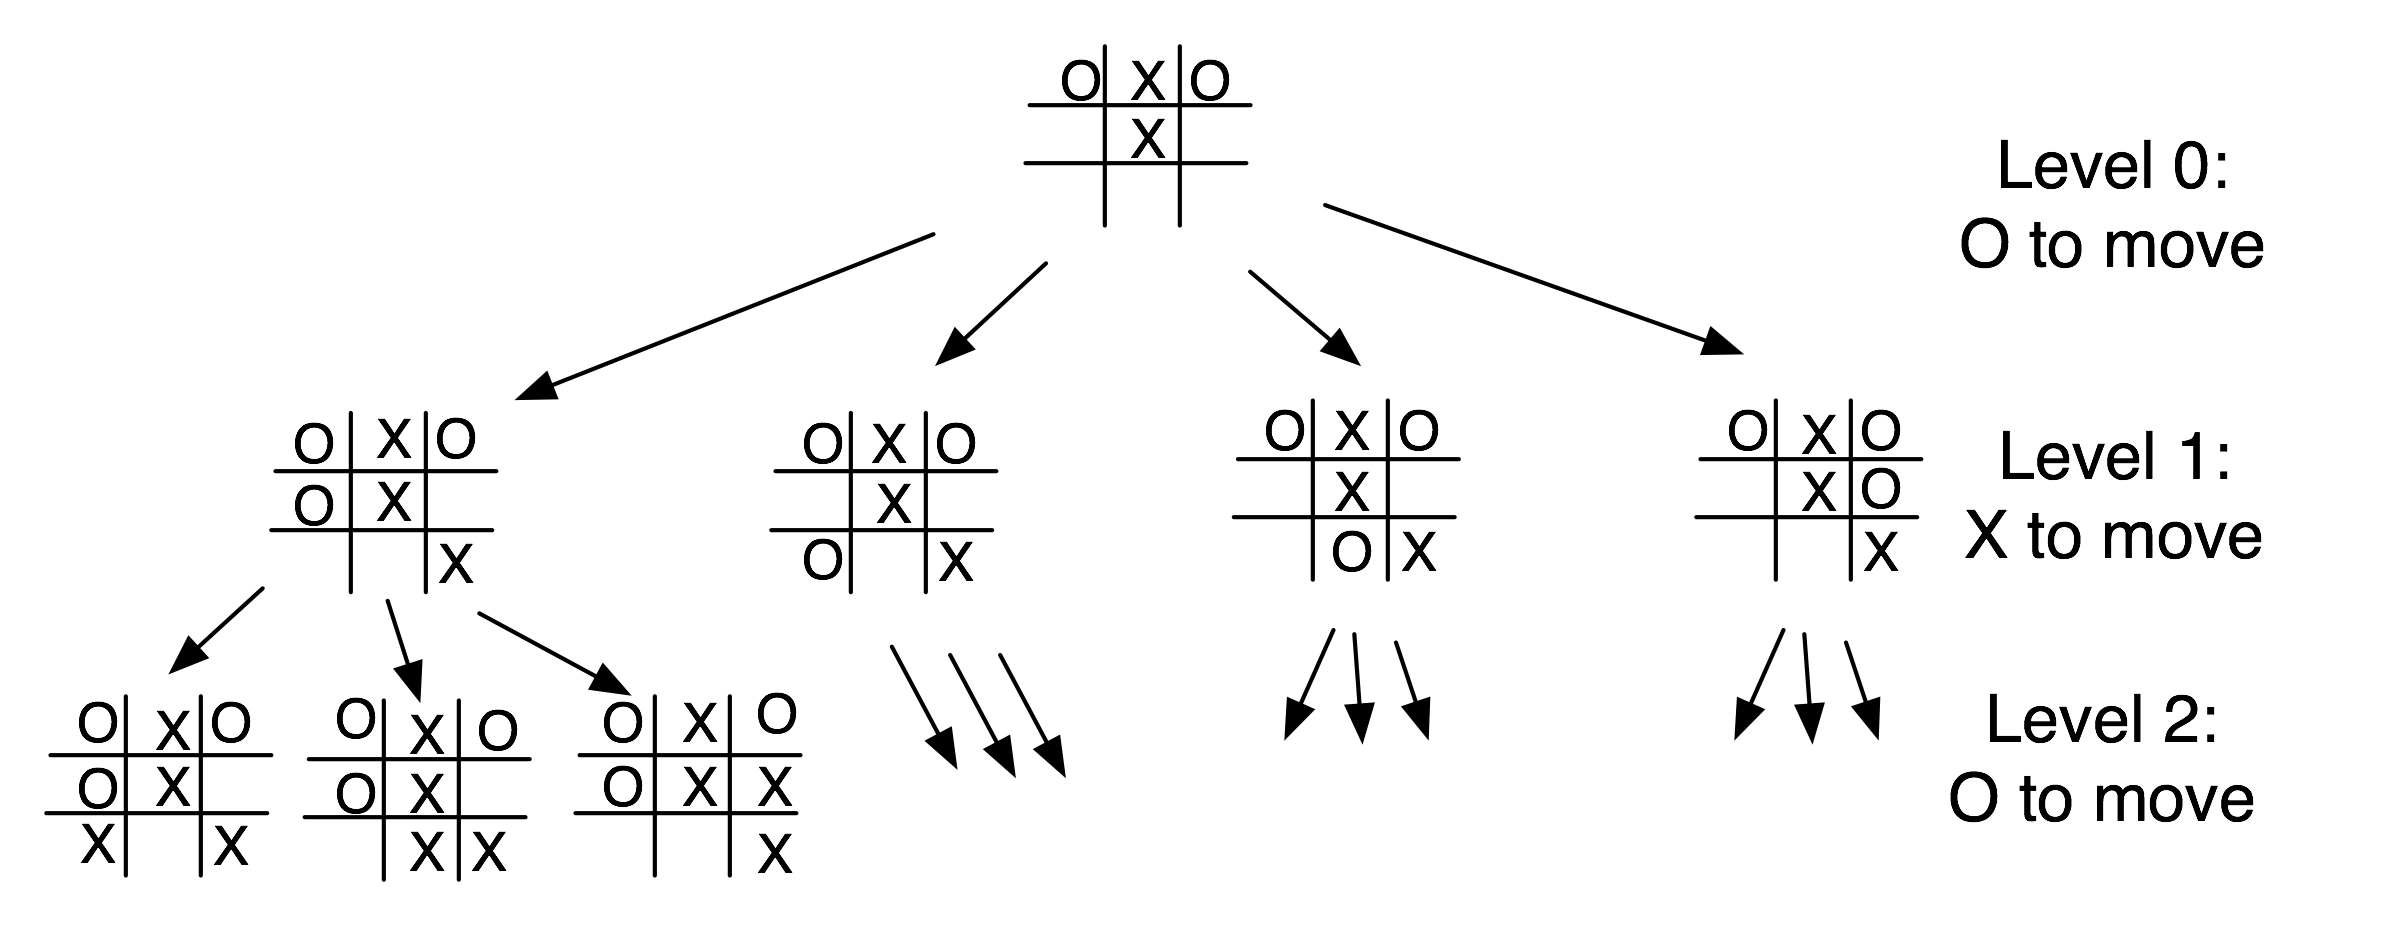 Alpha Beta Search for Tic-Tac-Toe